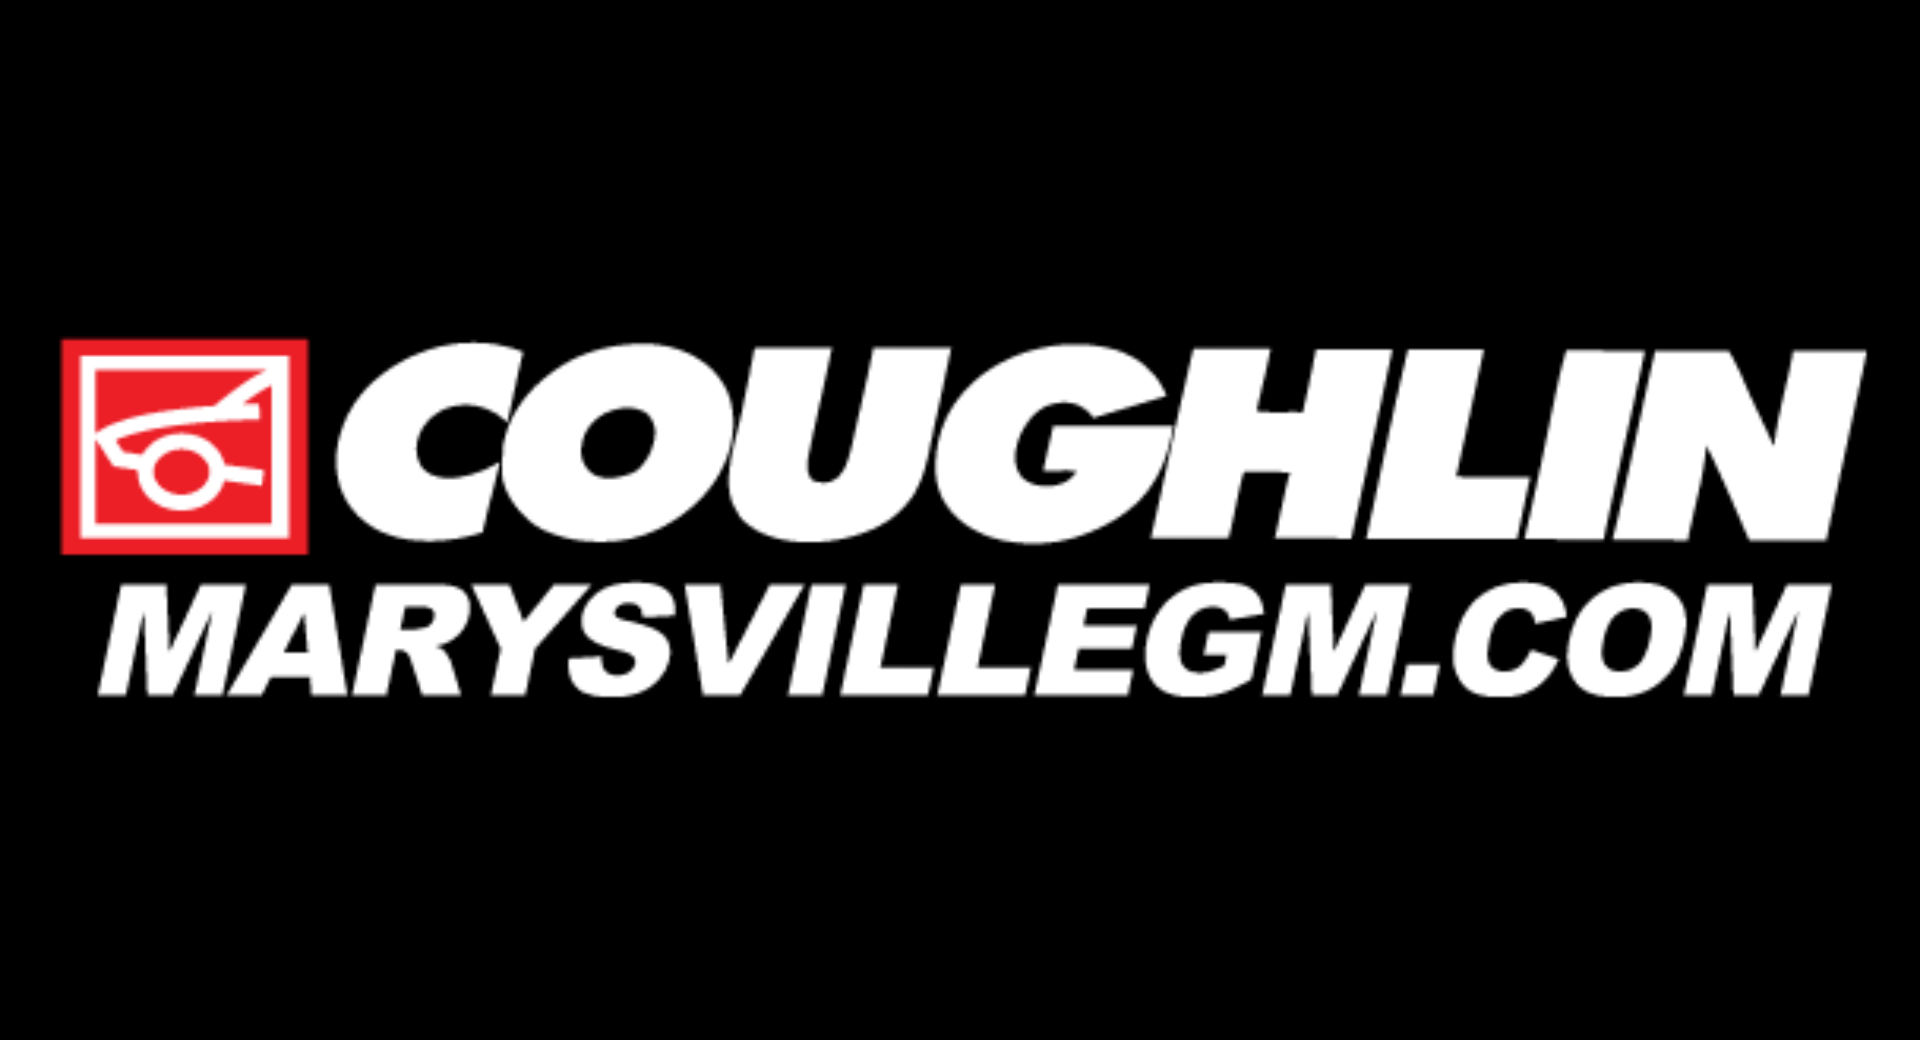 Coughlin Chevrolet Buick Cadillac is a Certified Agriculture Dealership